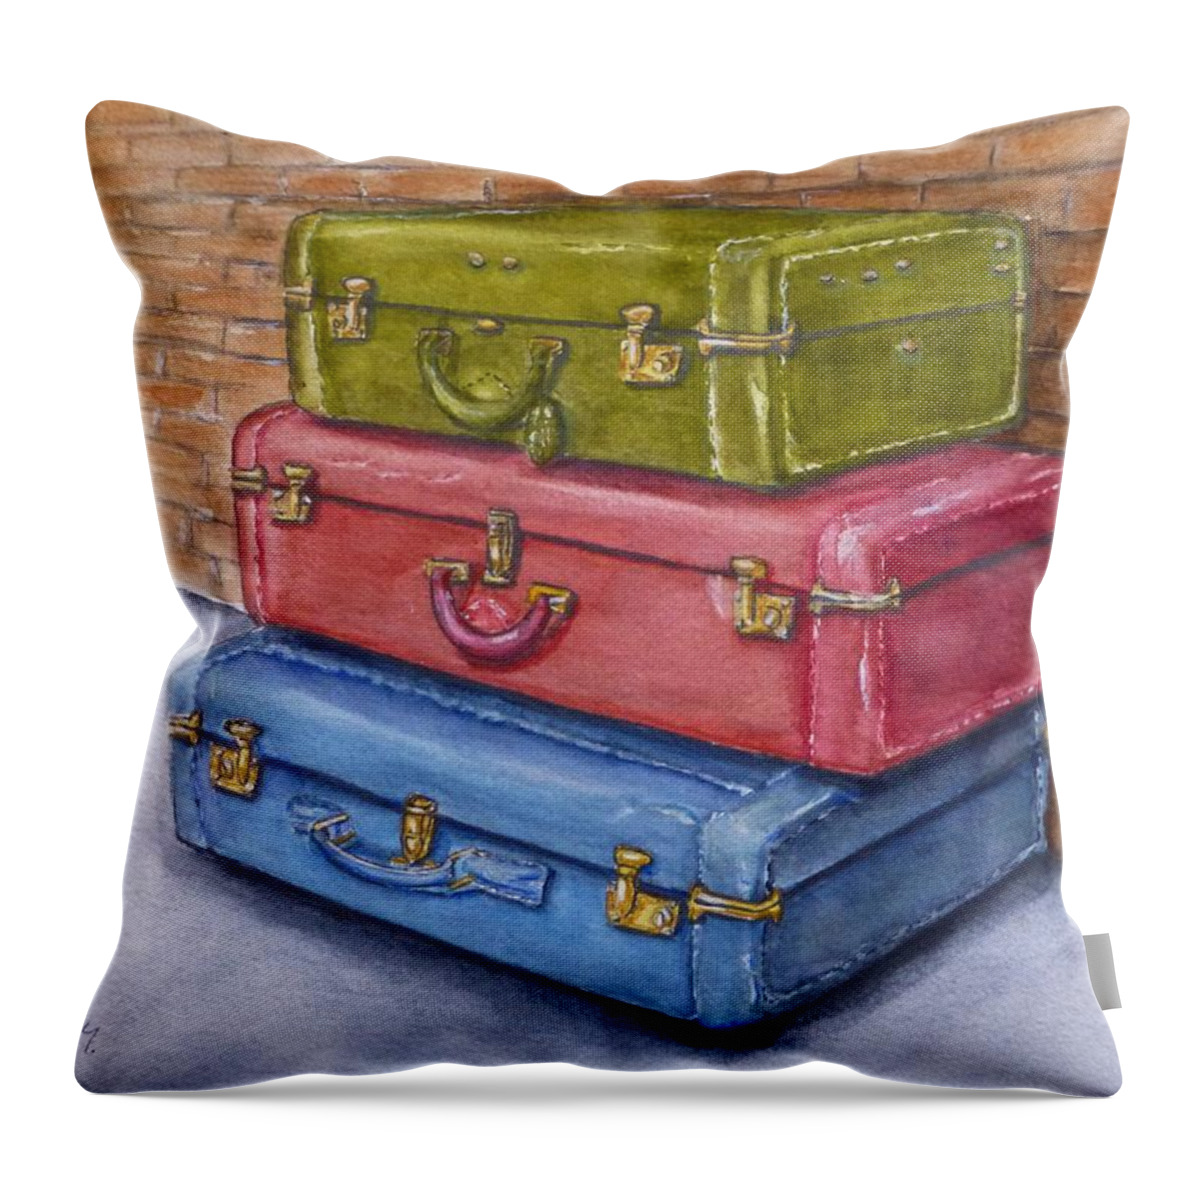 Old Suitcases Throw Pillow featuring the painting The Old Suitcases by Kelly Mills